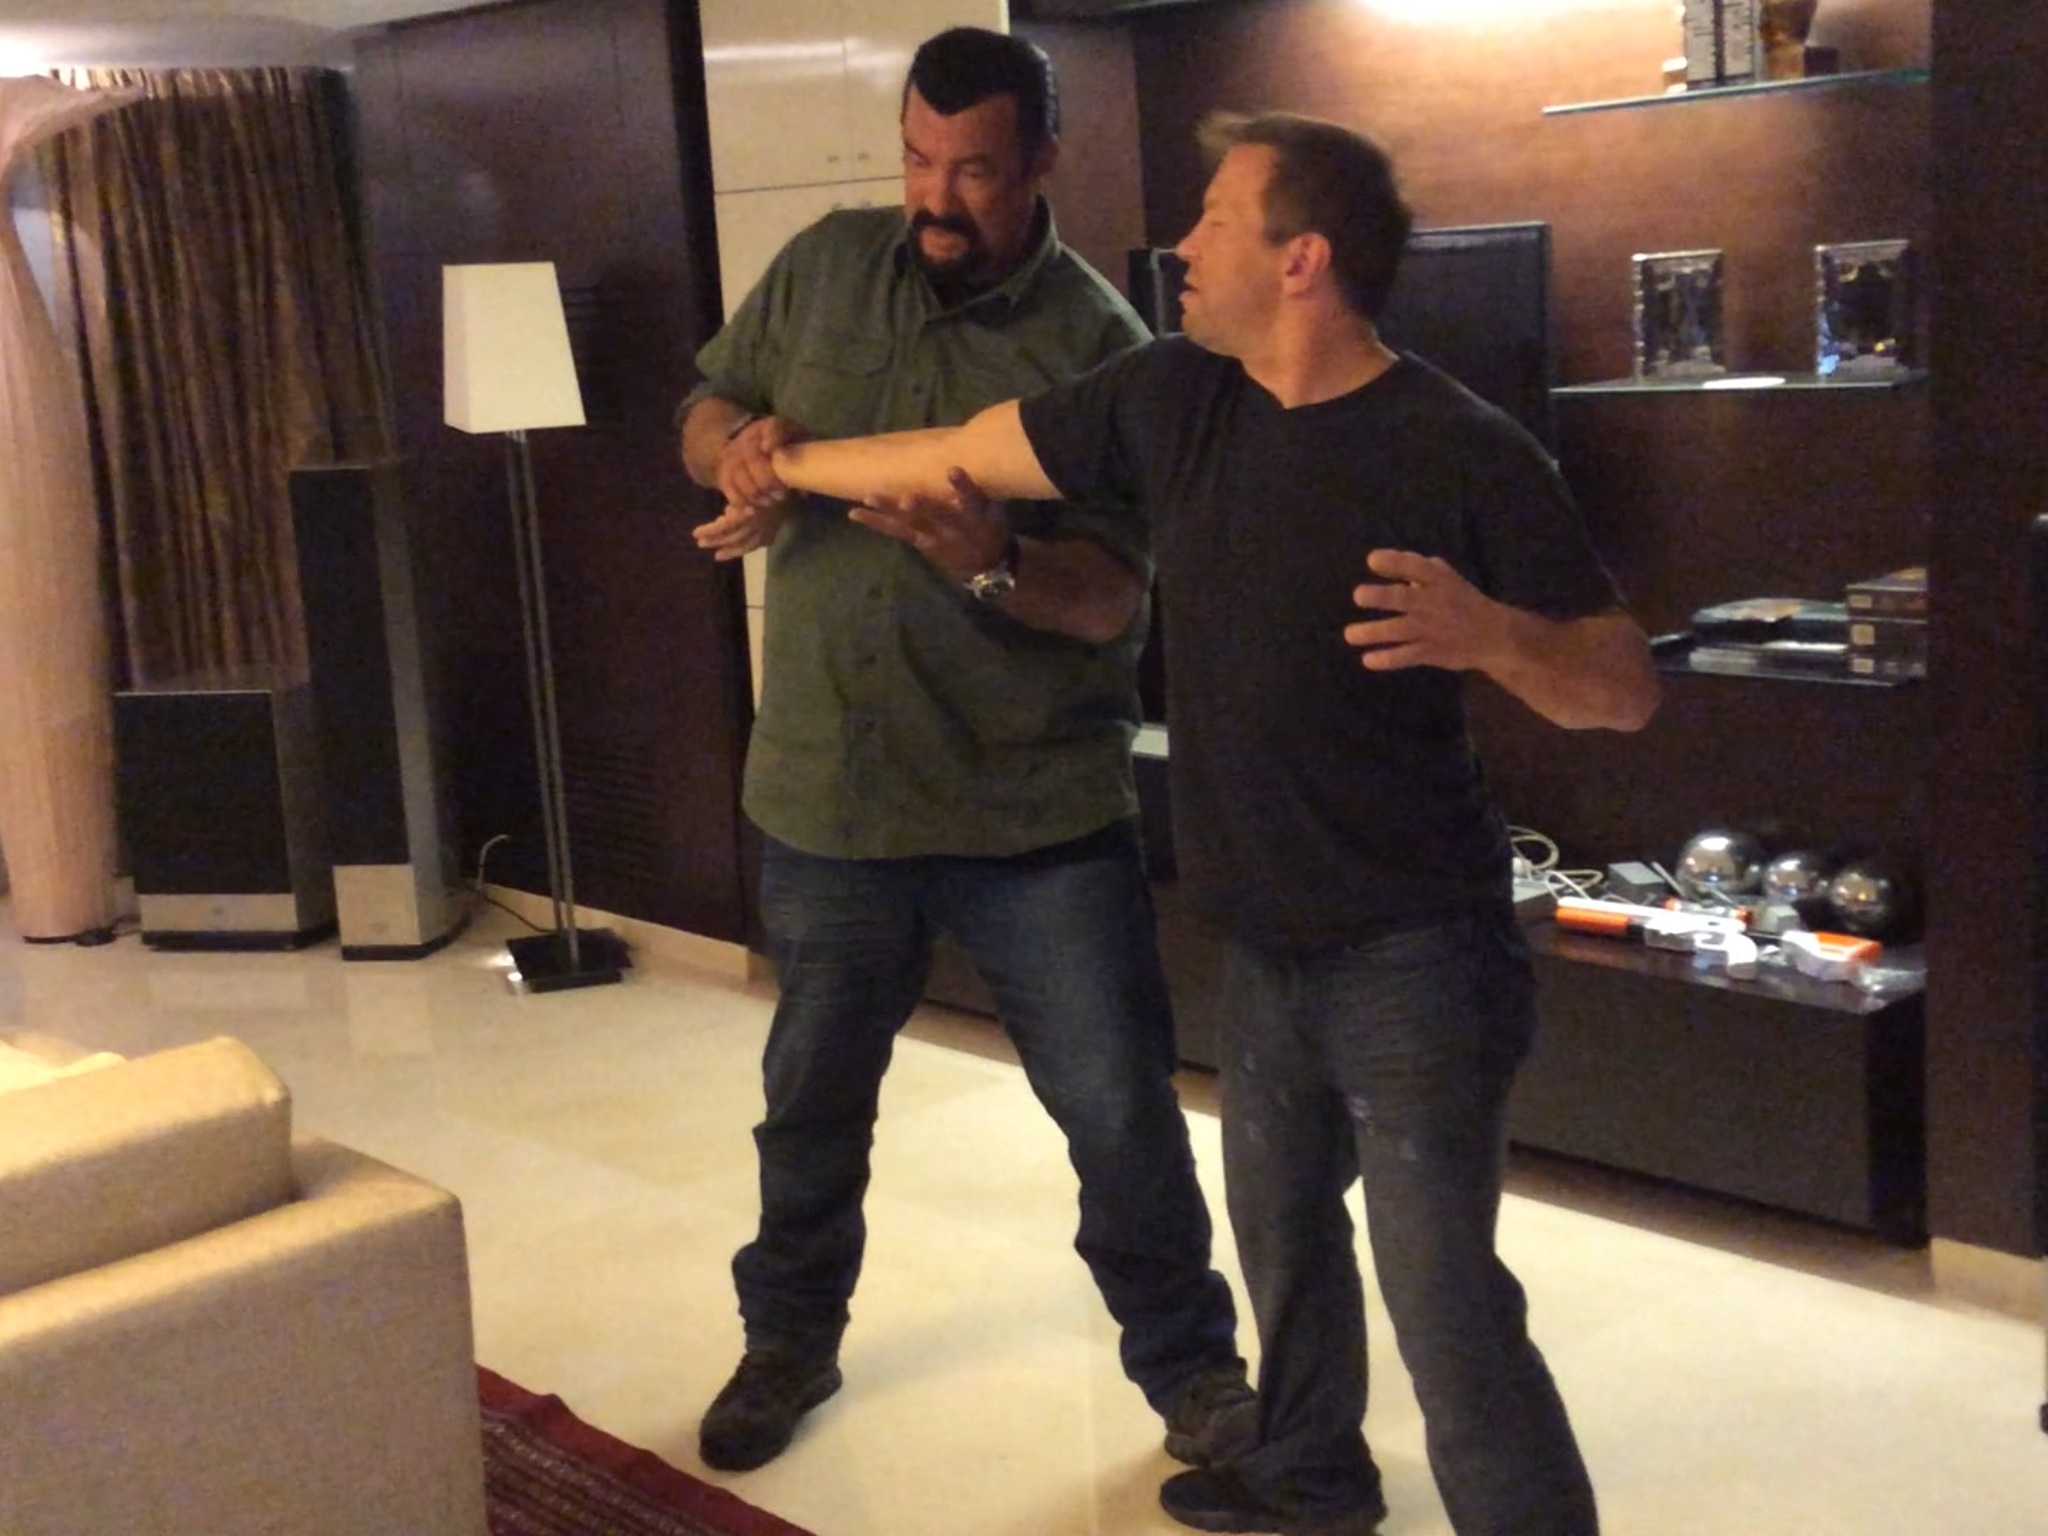 Steven Seagal and Ron Balicki going over choreography for their fight scene in Absolution.